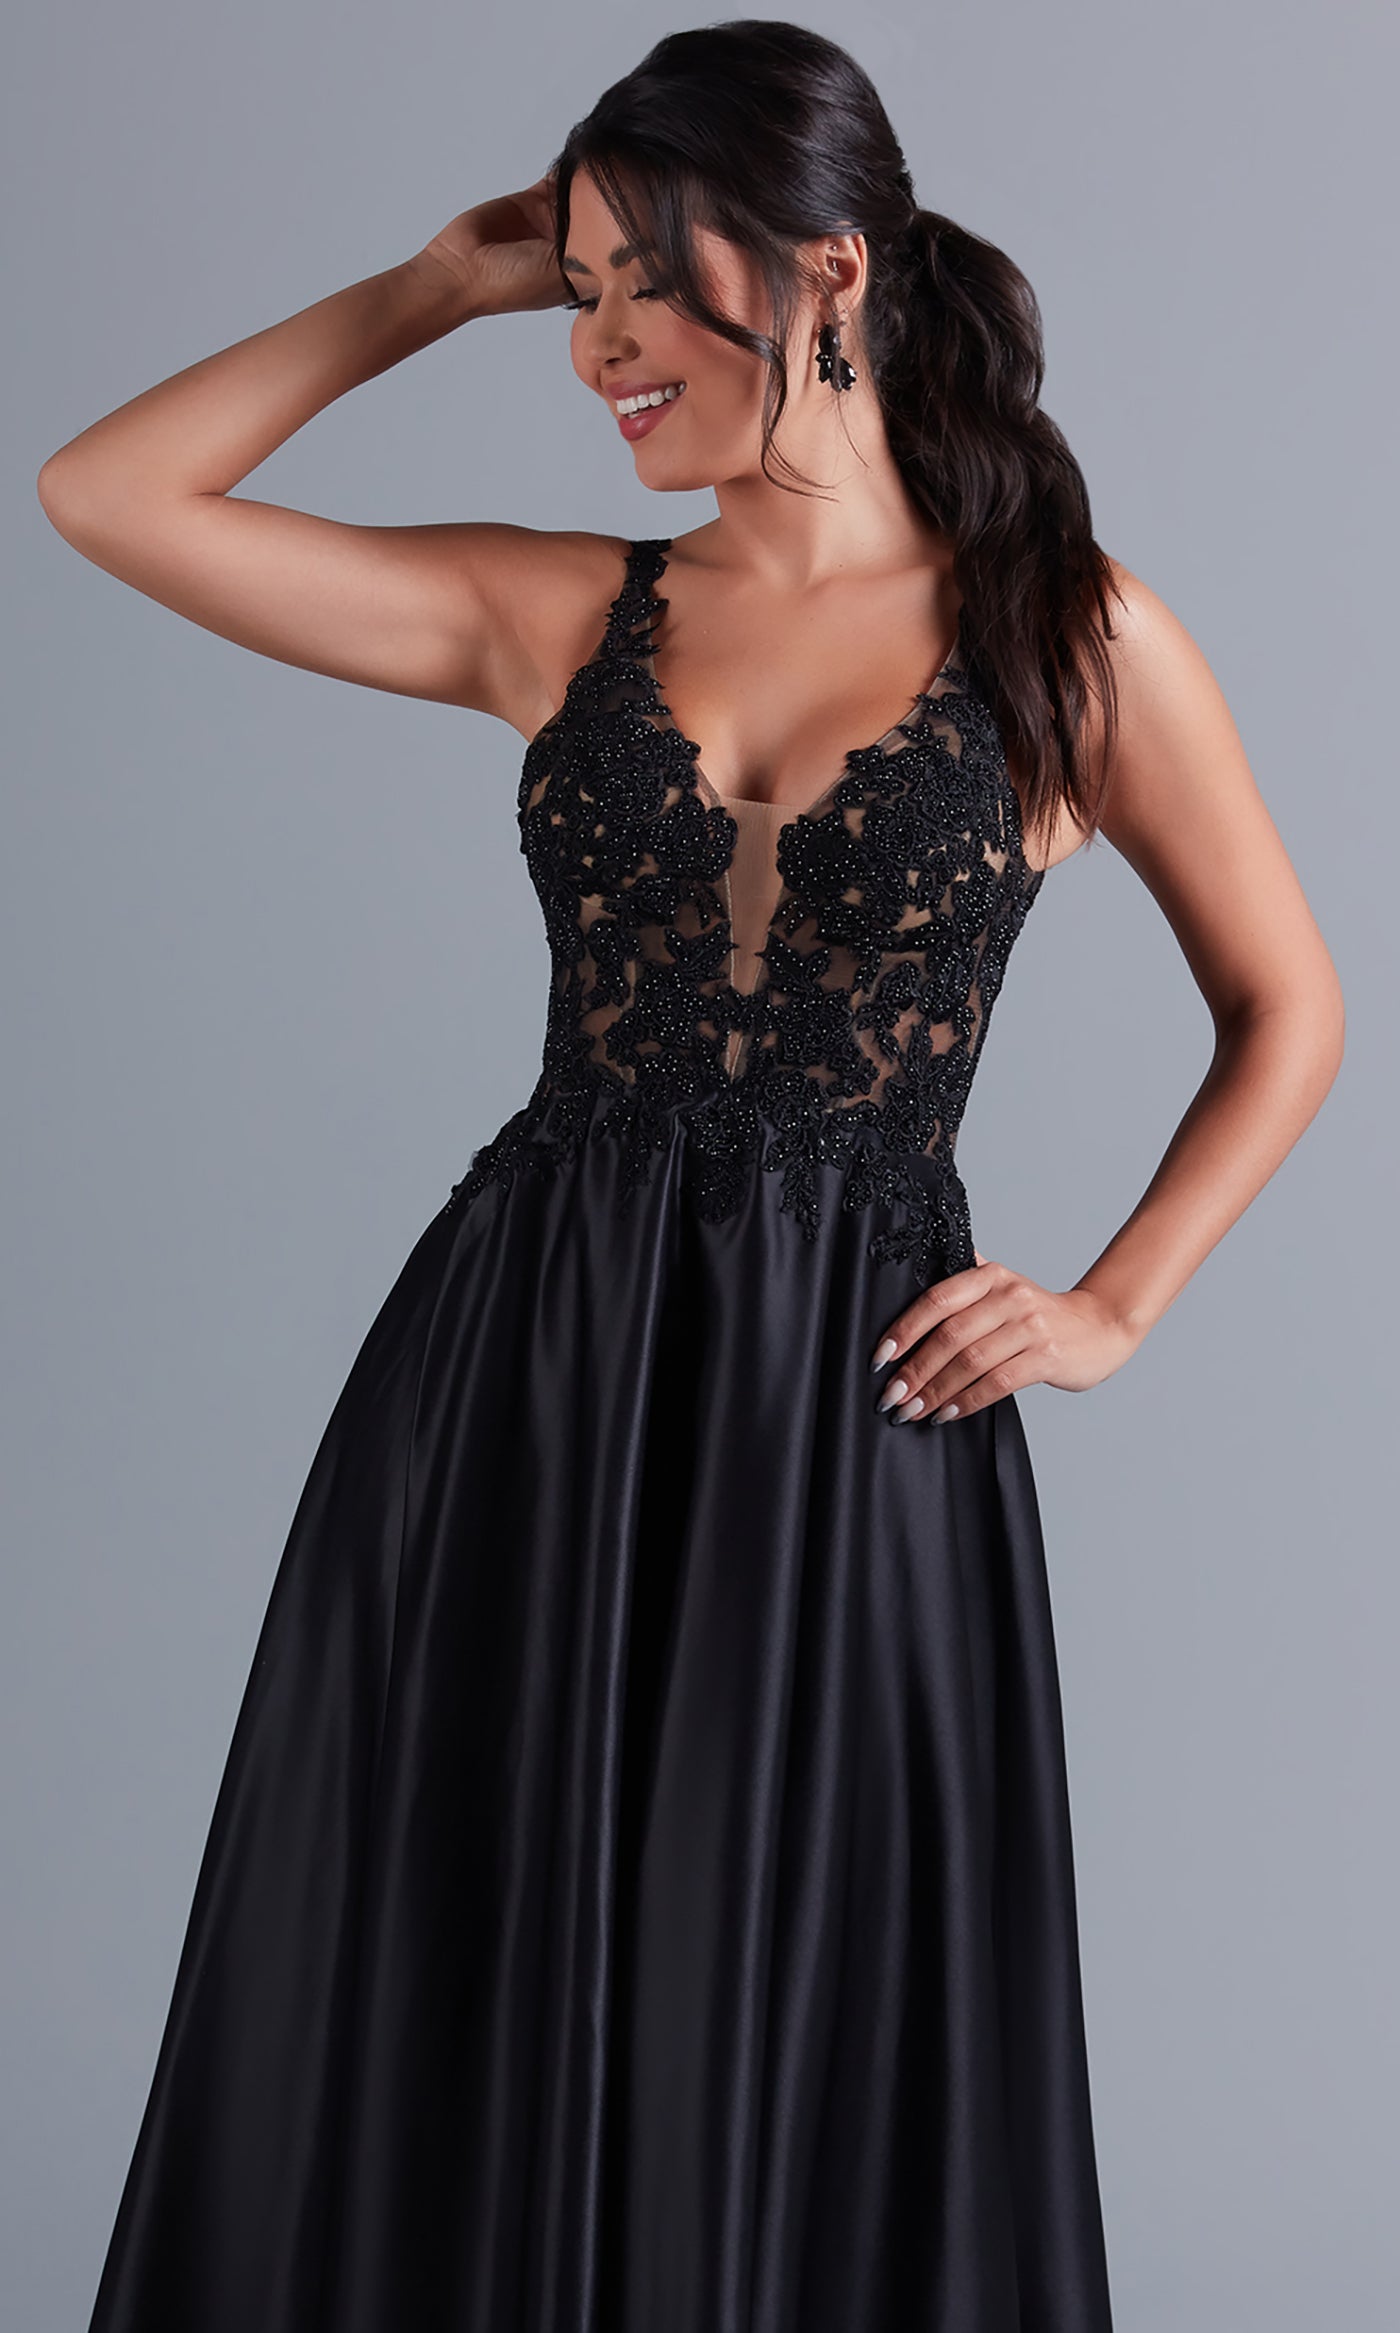  Long Black Formal Dress with Sheer Lace Bodice